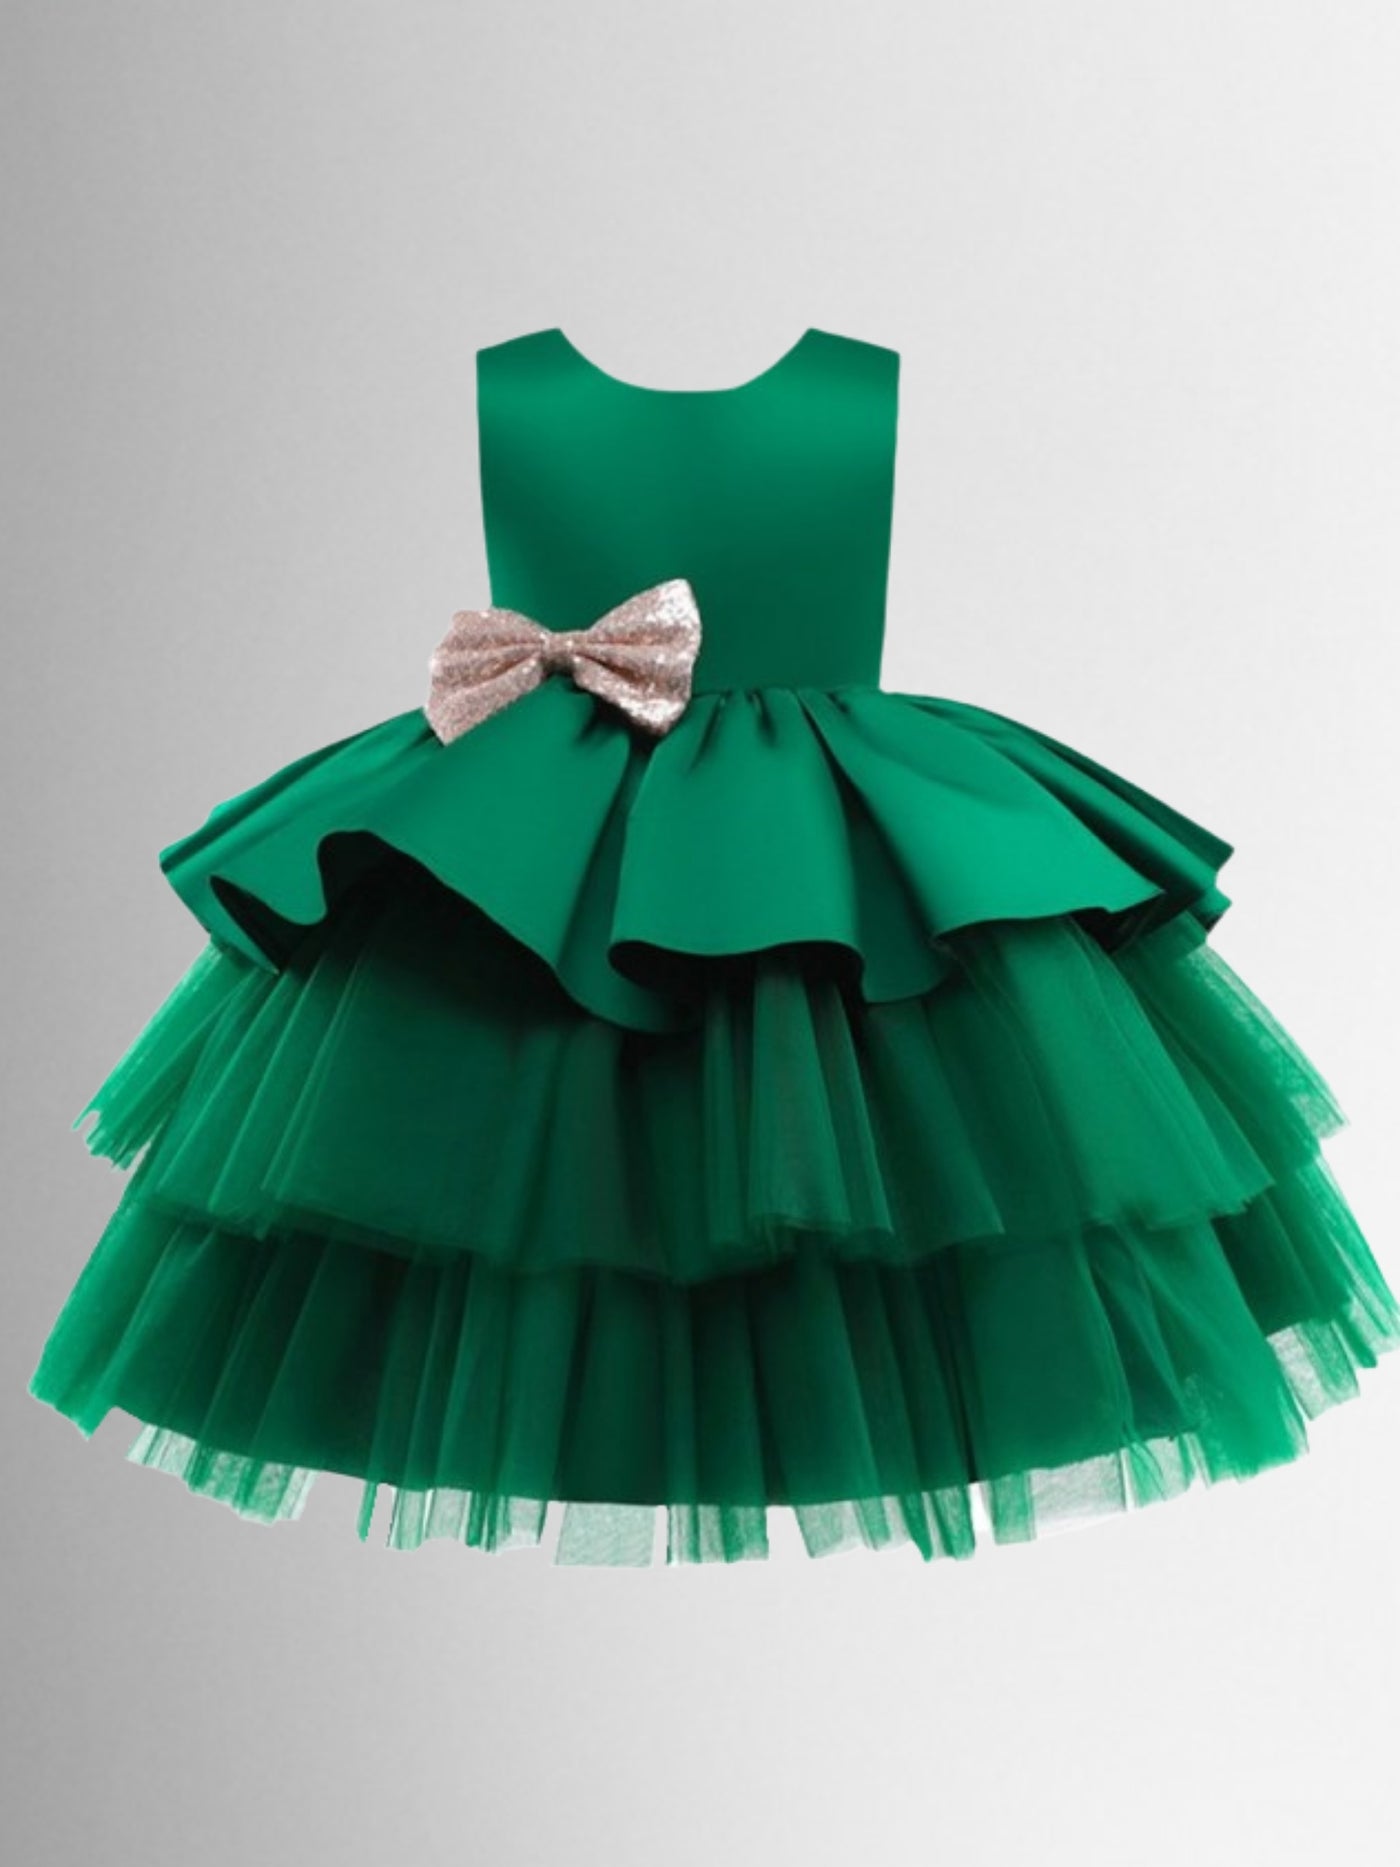 Girls Winter Formal Dress | Tulle Holiday Princess Dress | Boutique